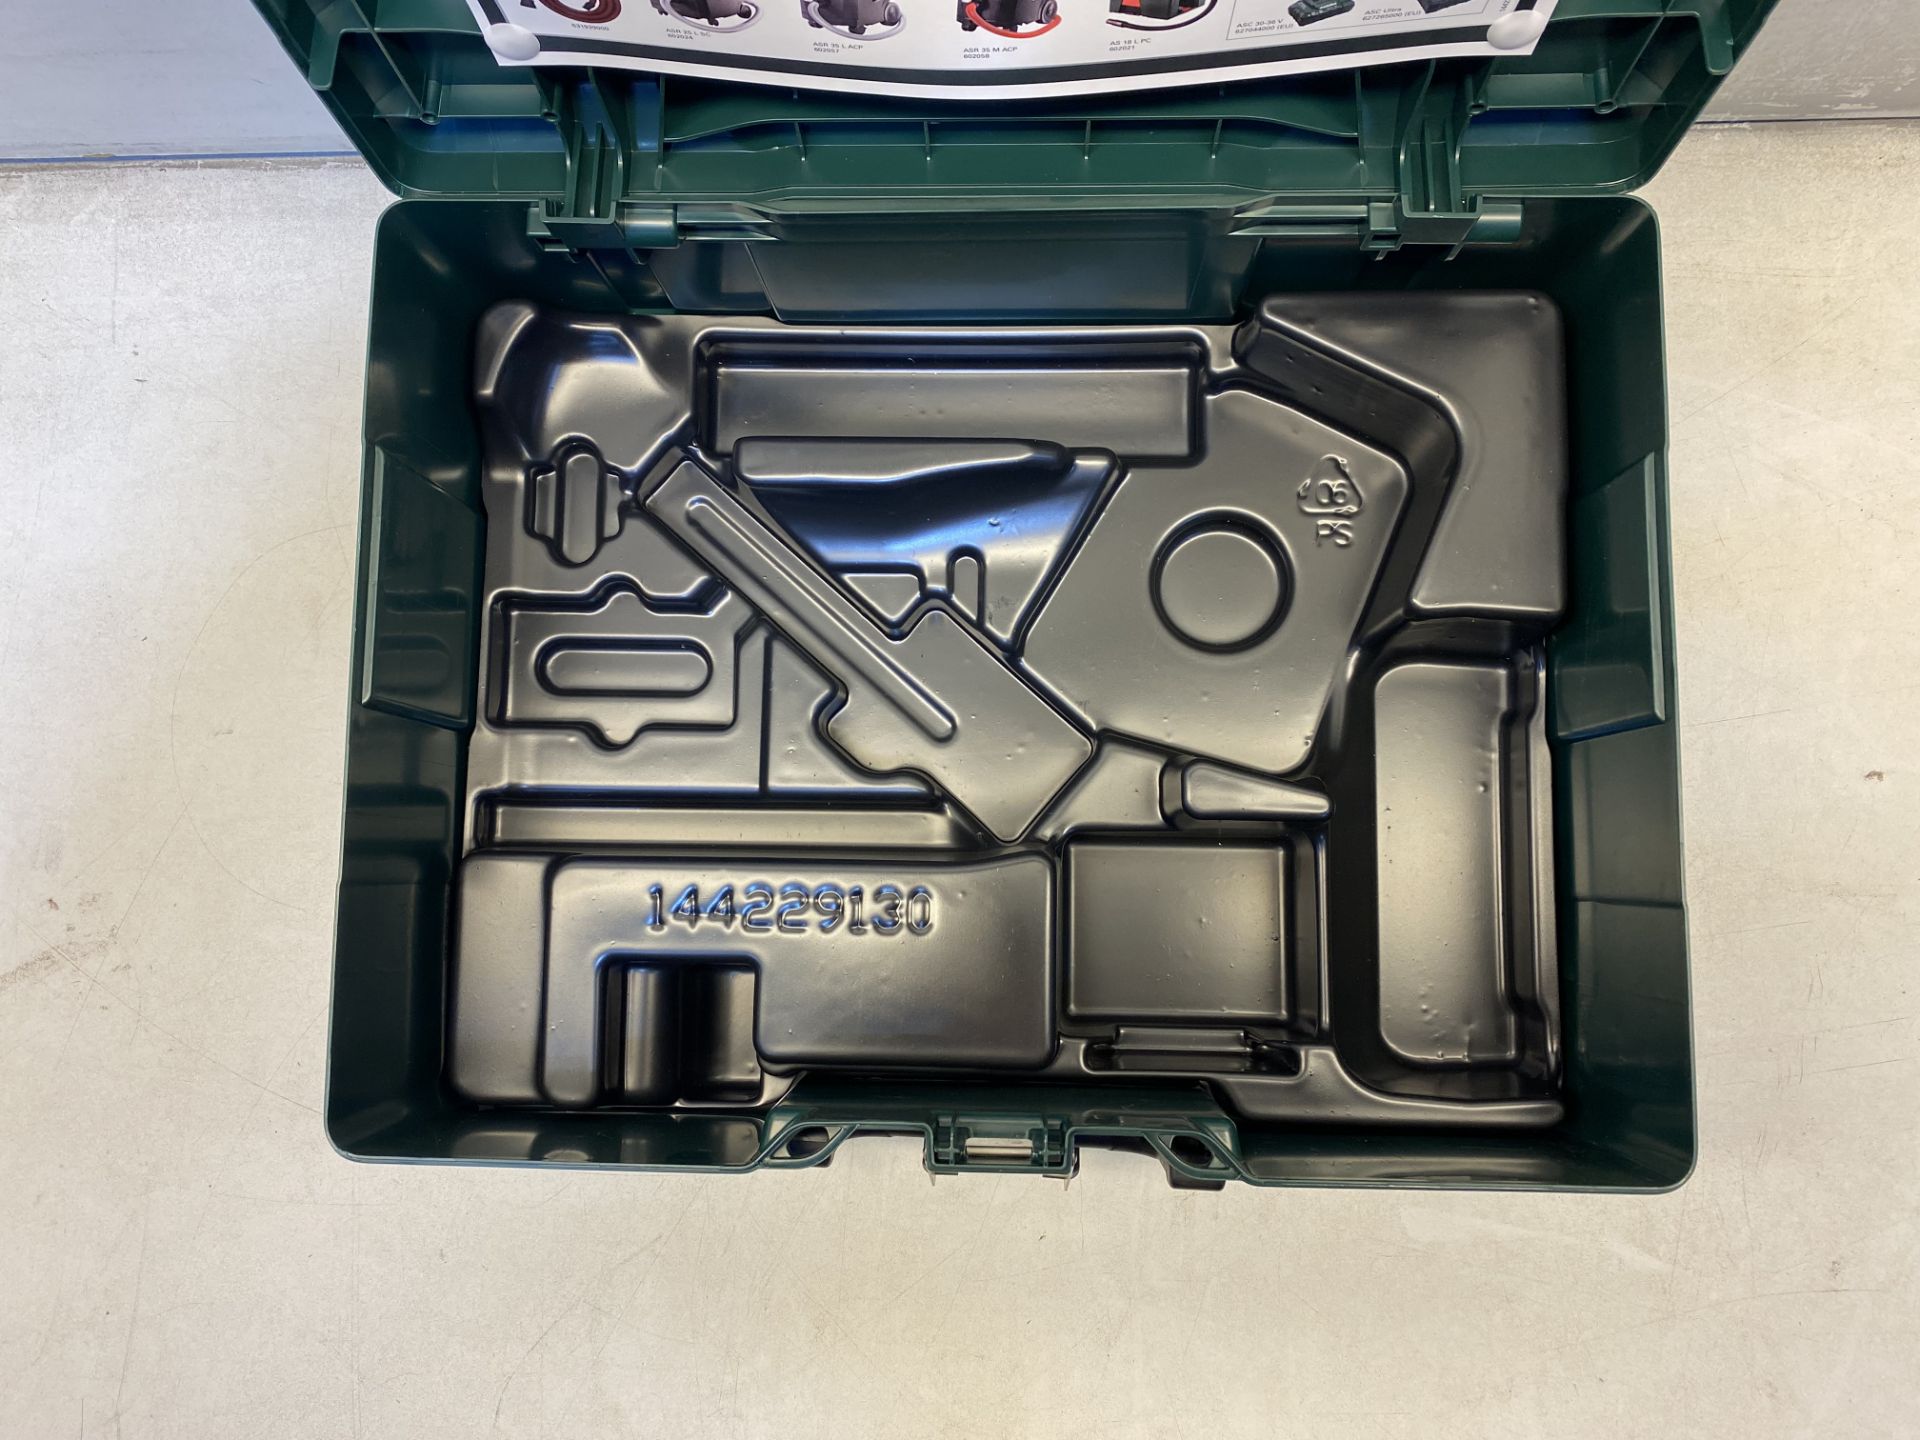 Carry Case For Metabo STA18LTX100 Body Grip Jigsaw ( Jigsaw Not Included ) - Image 4 of 4